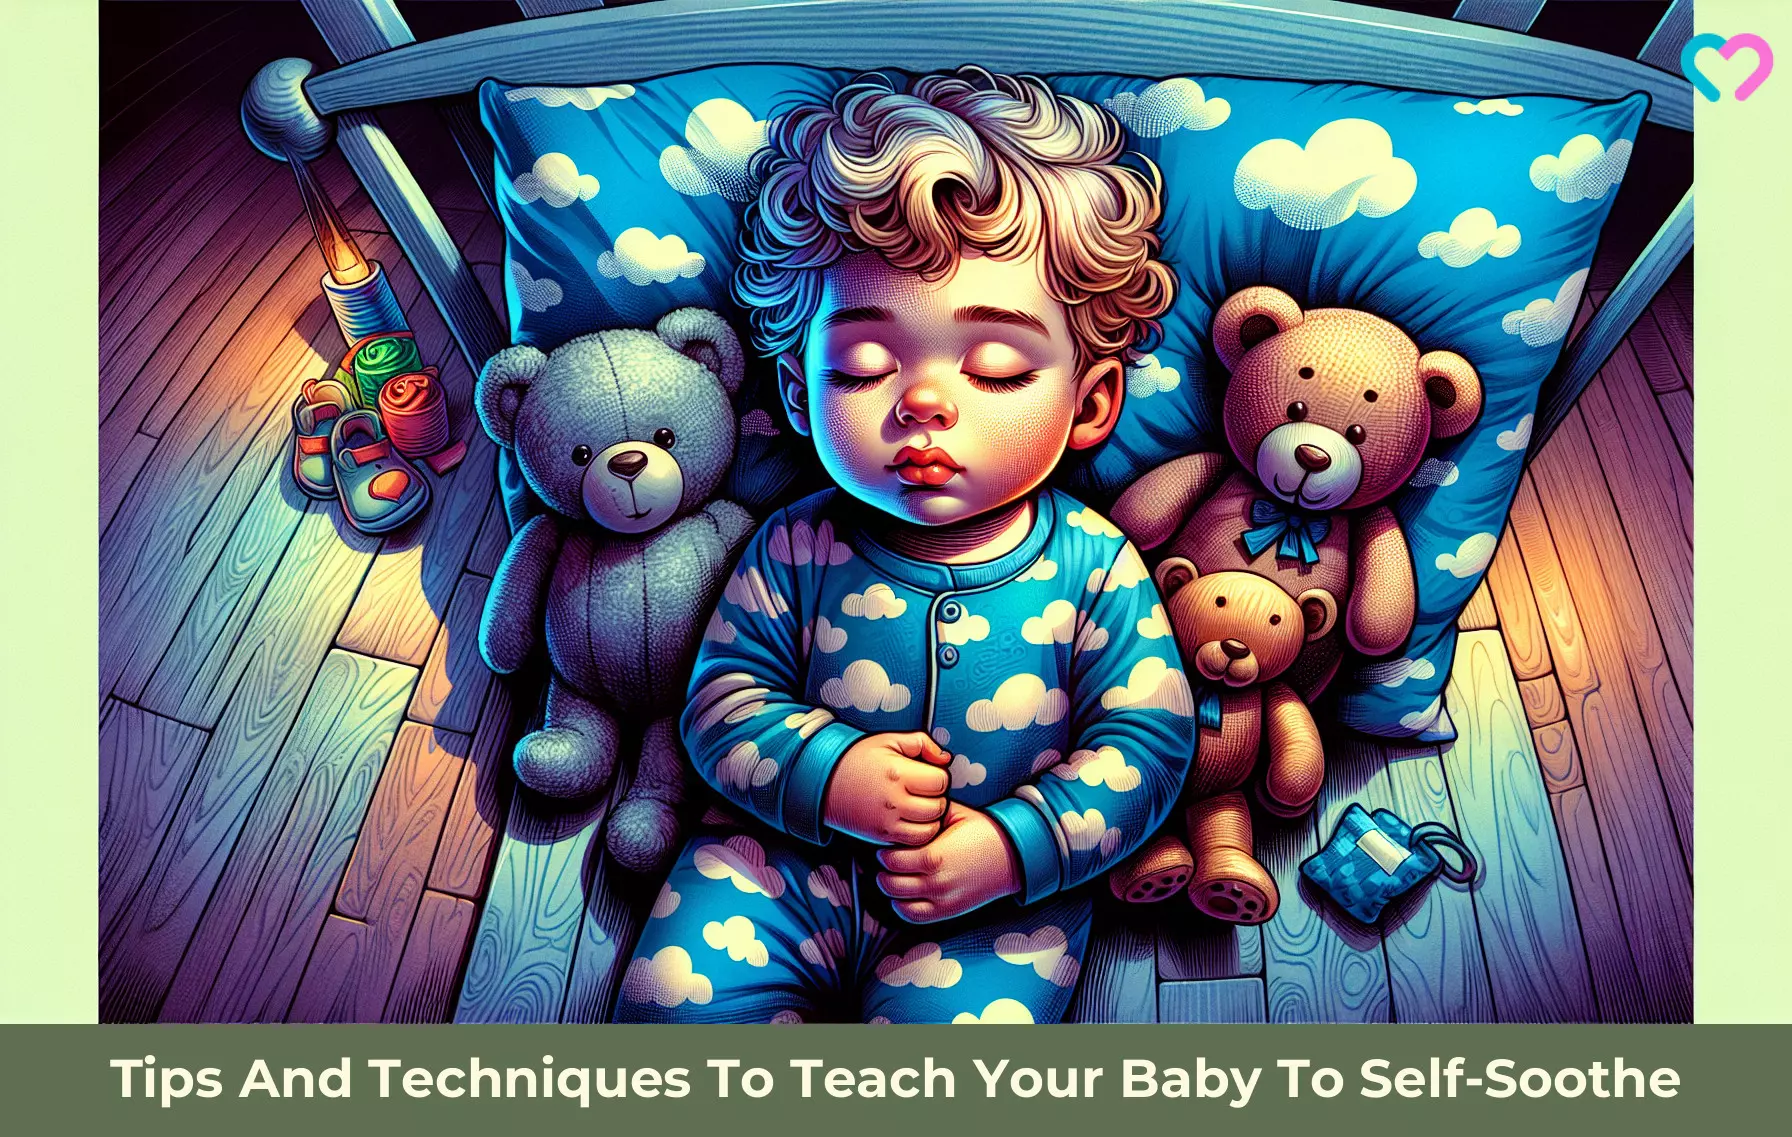 Baby To Self-Soothe_illustration